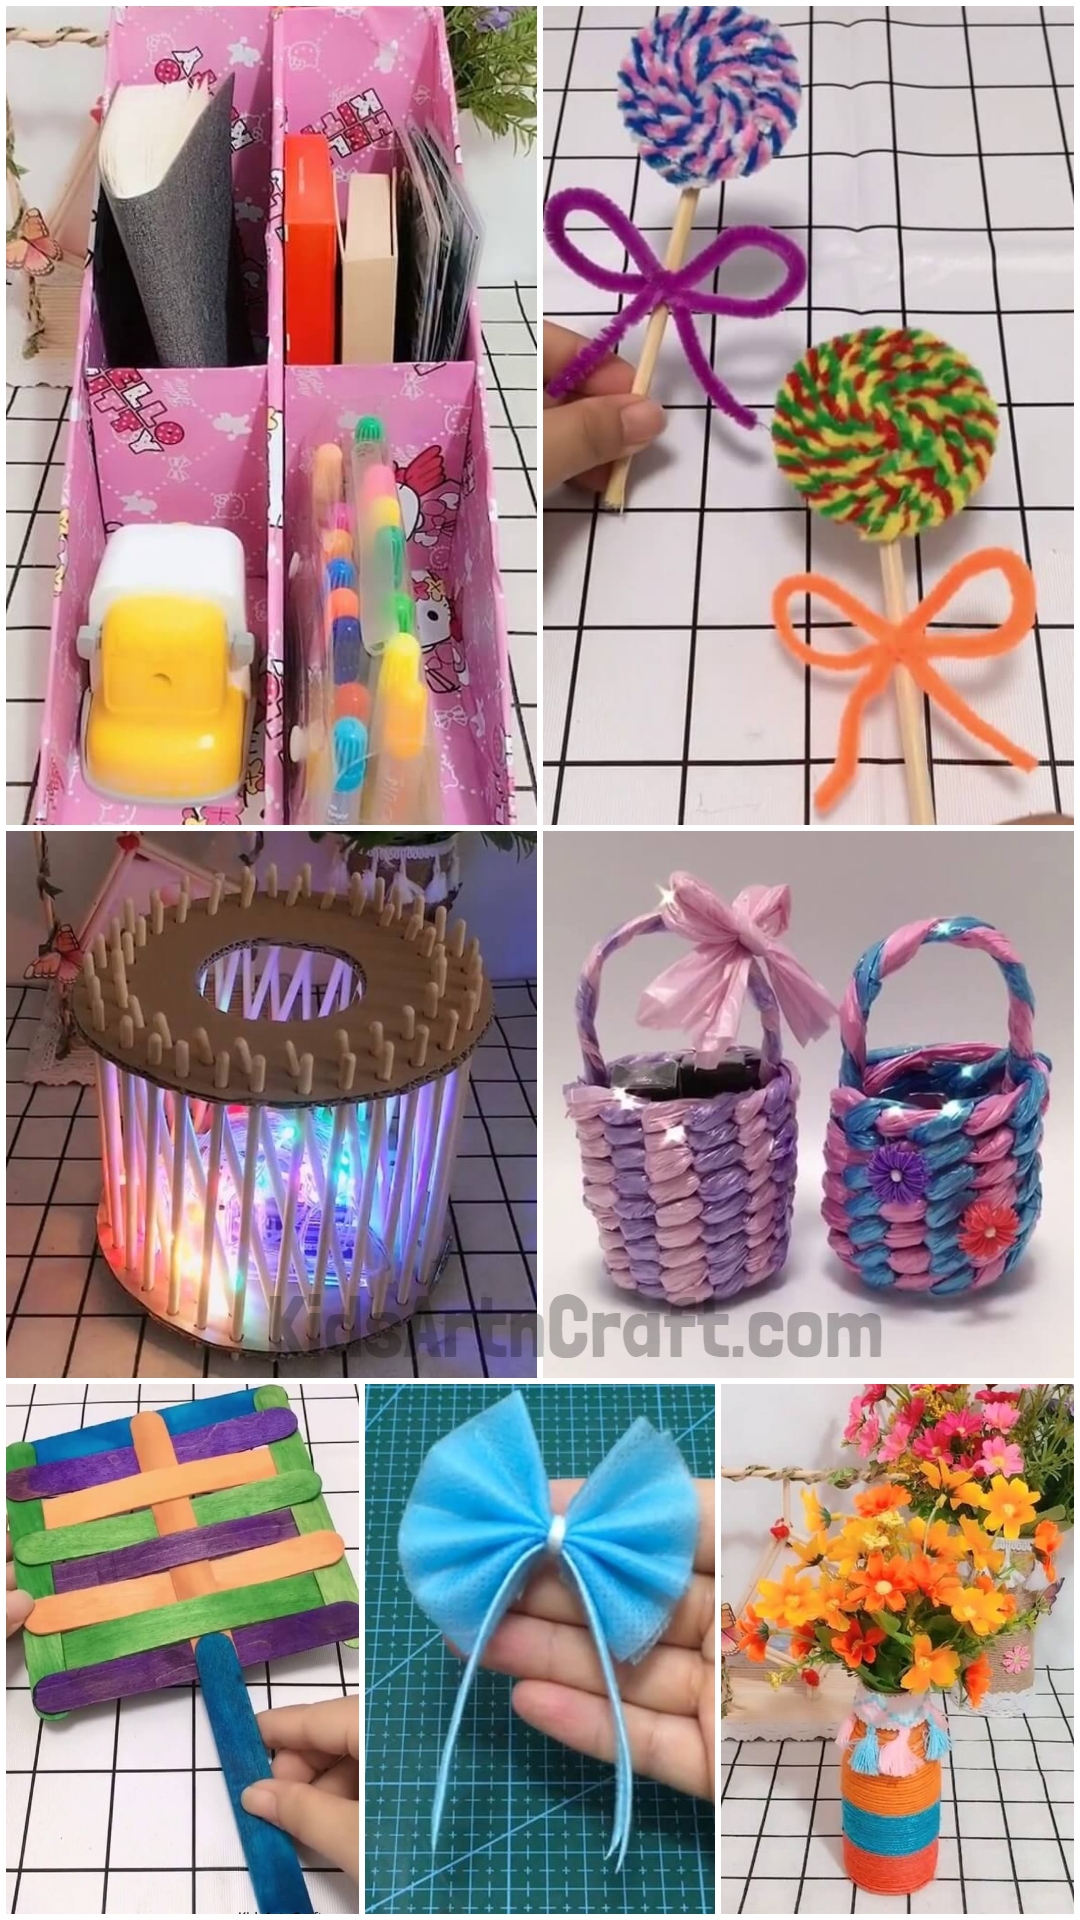 11 Fun and Easy Craft Ideas for Kids